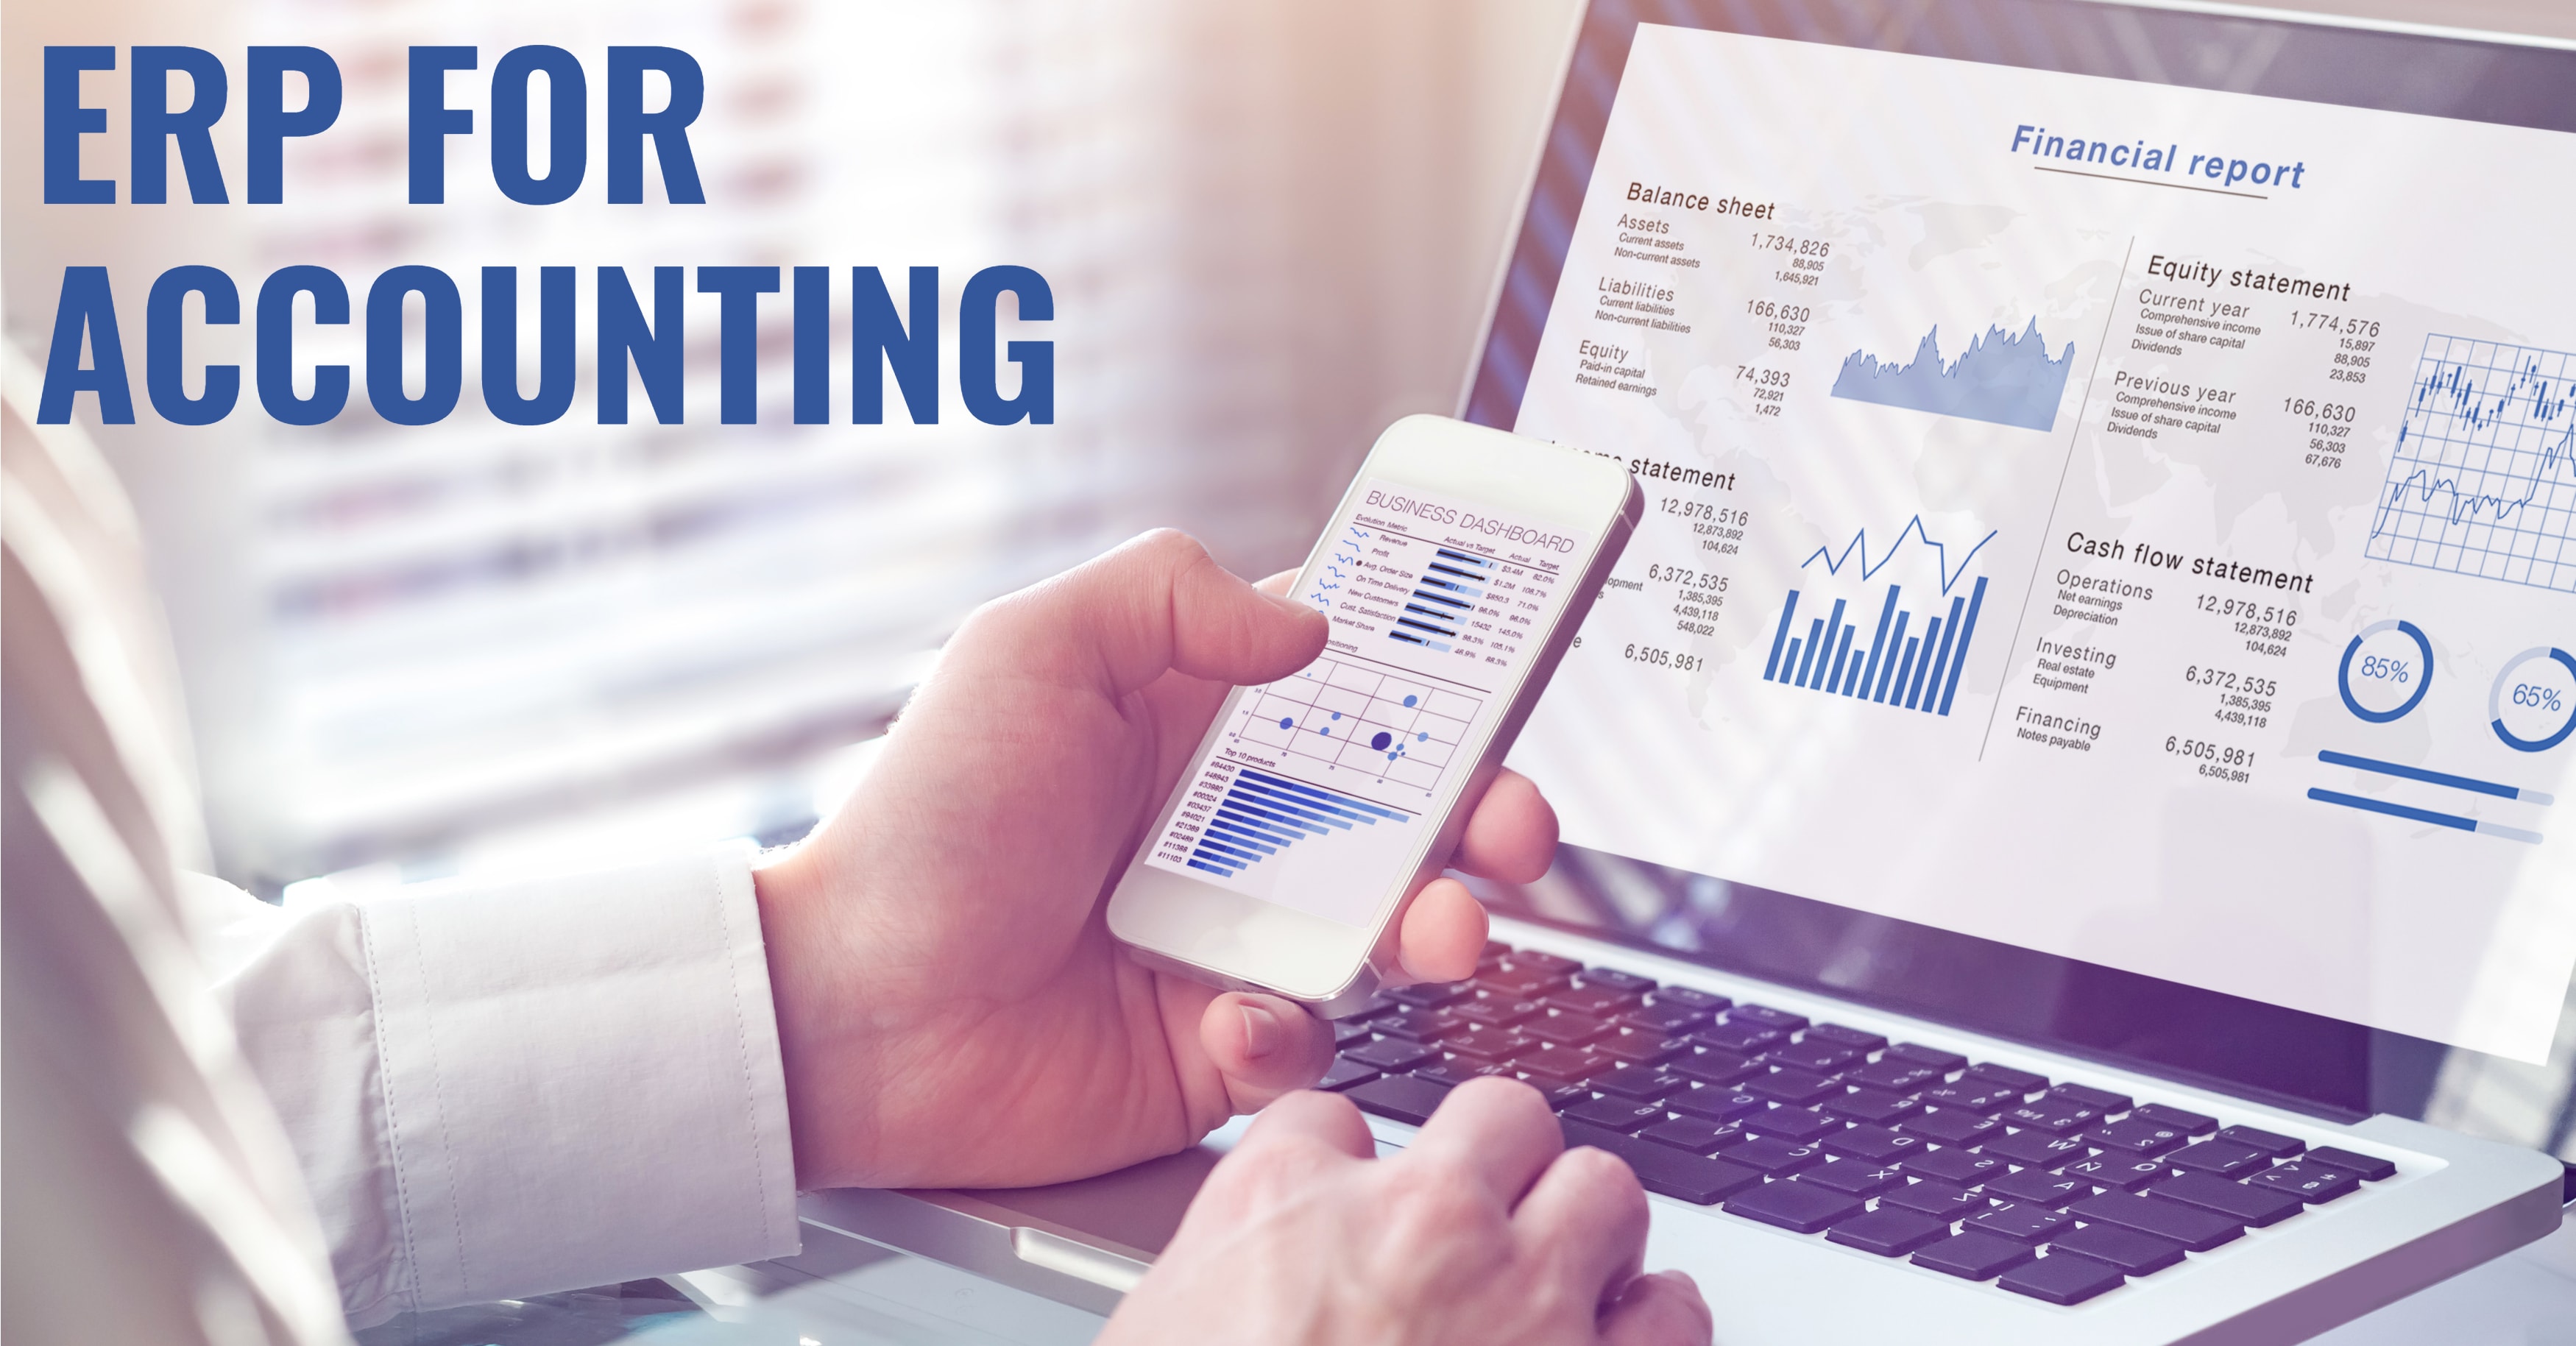 ERP Improves Accounting Processes